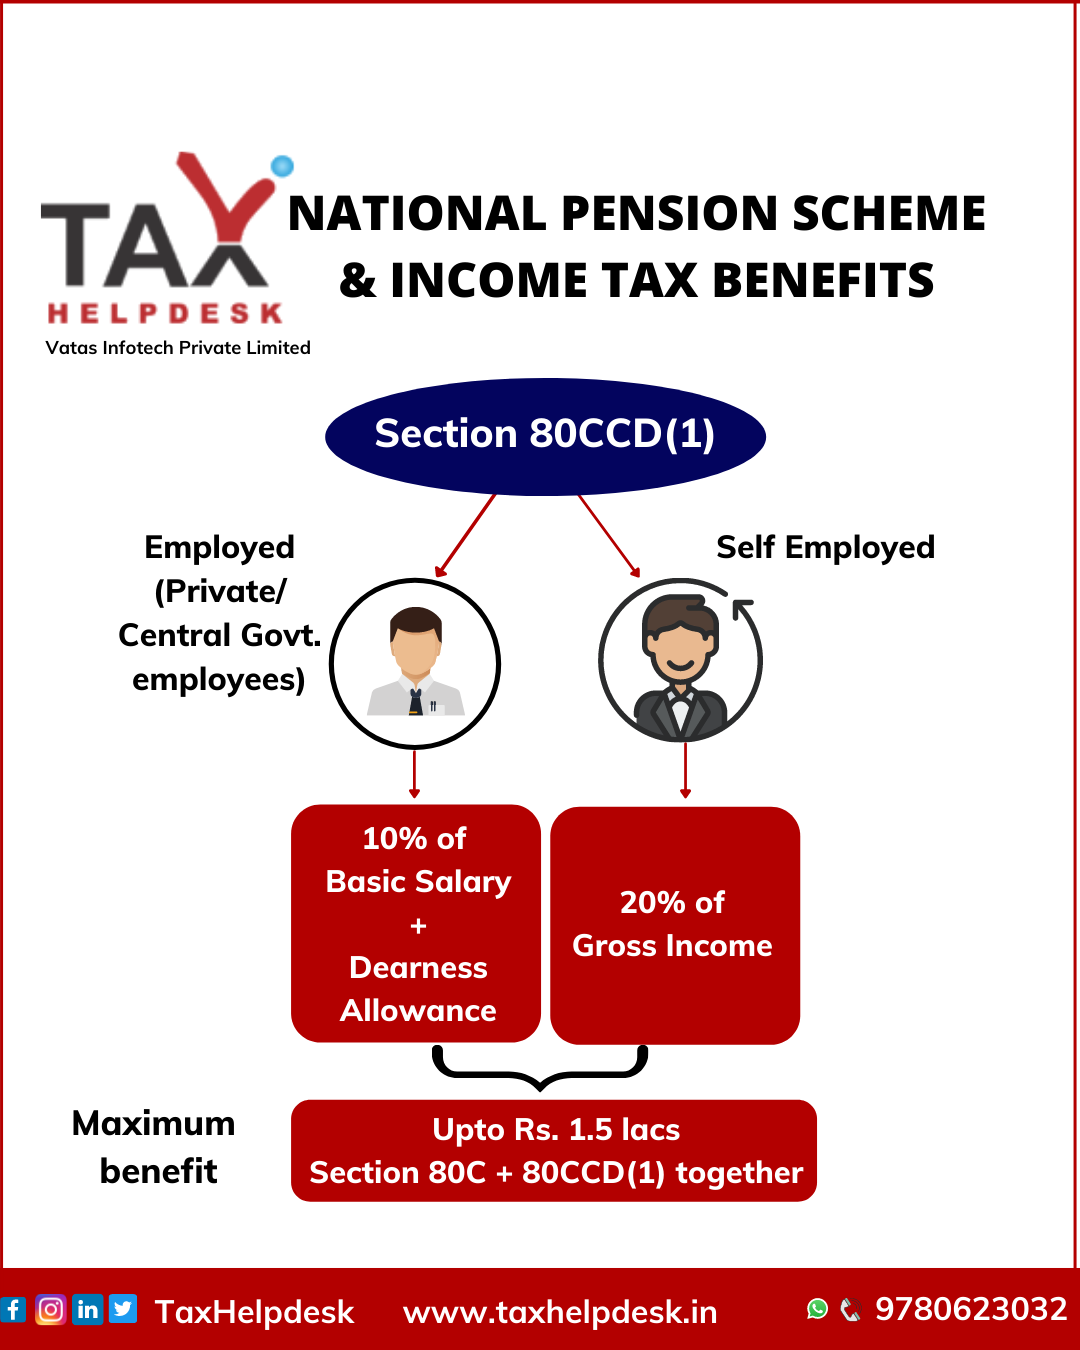 all-about-the-national-pension-scheme-in-india-taxhelpdesk